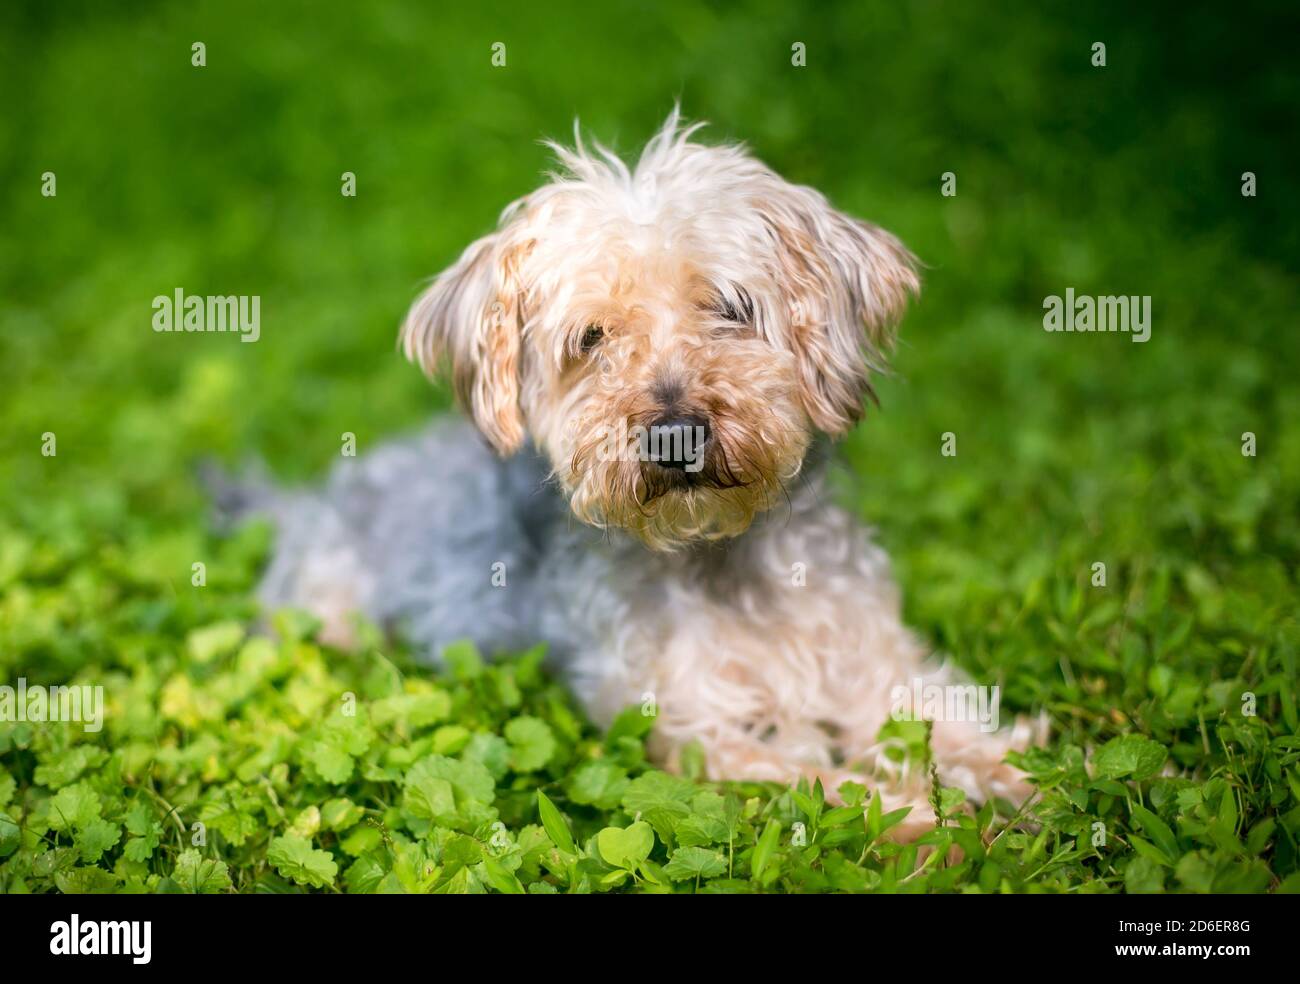 A Yorkshire Terrier x Poodle mixed breed dog lying down in the grass Stock Photo